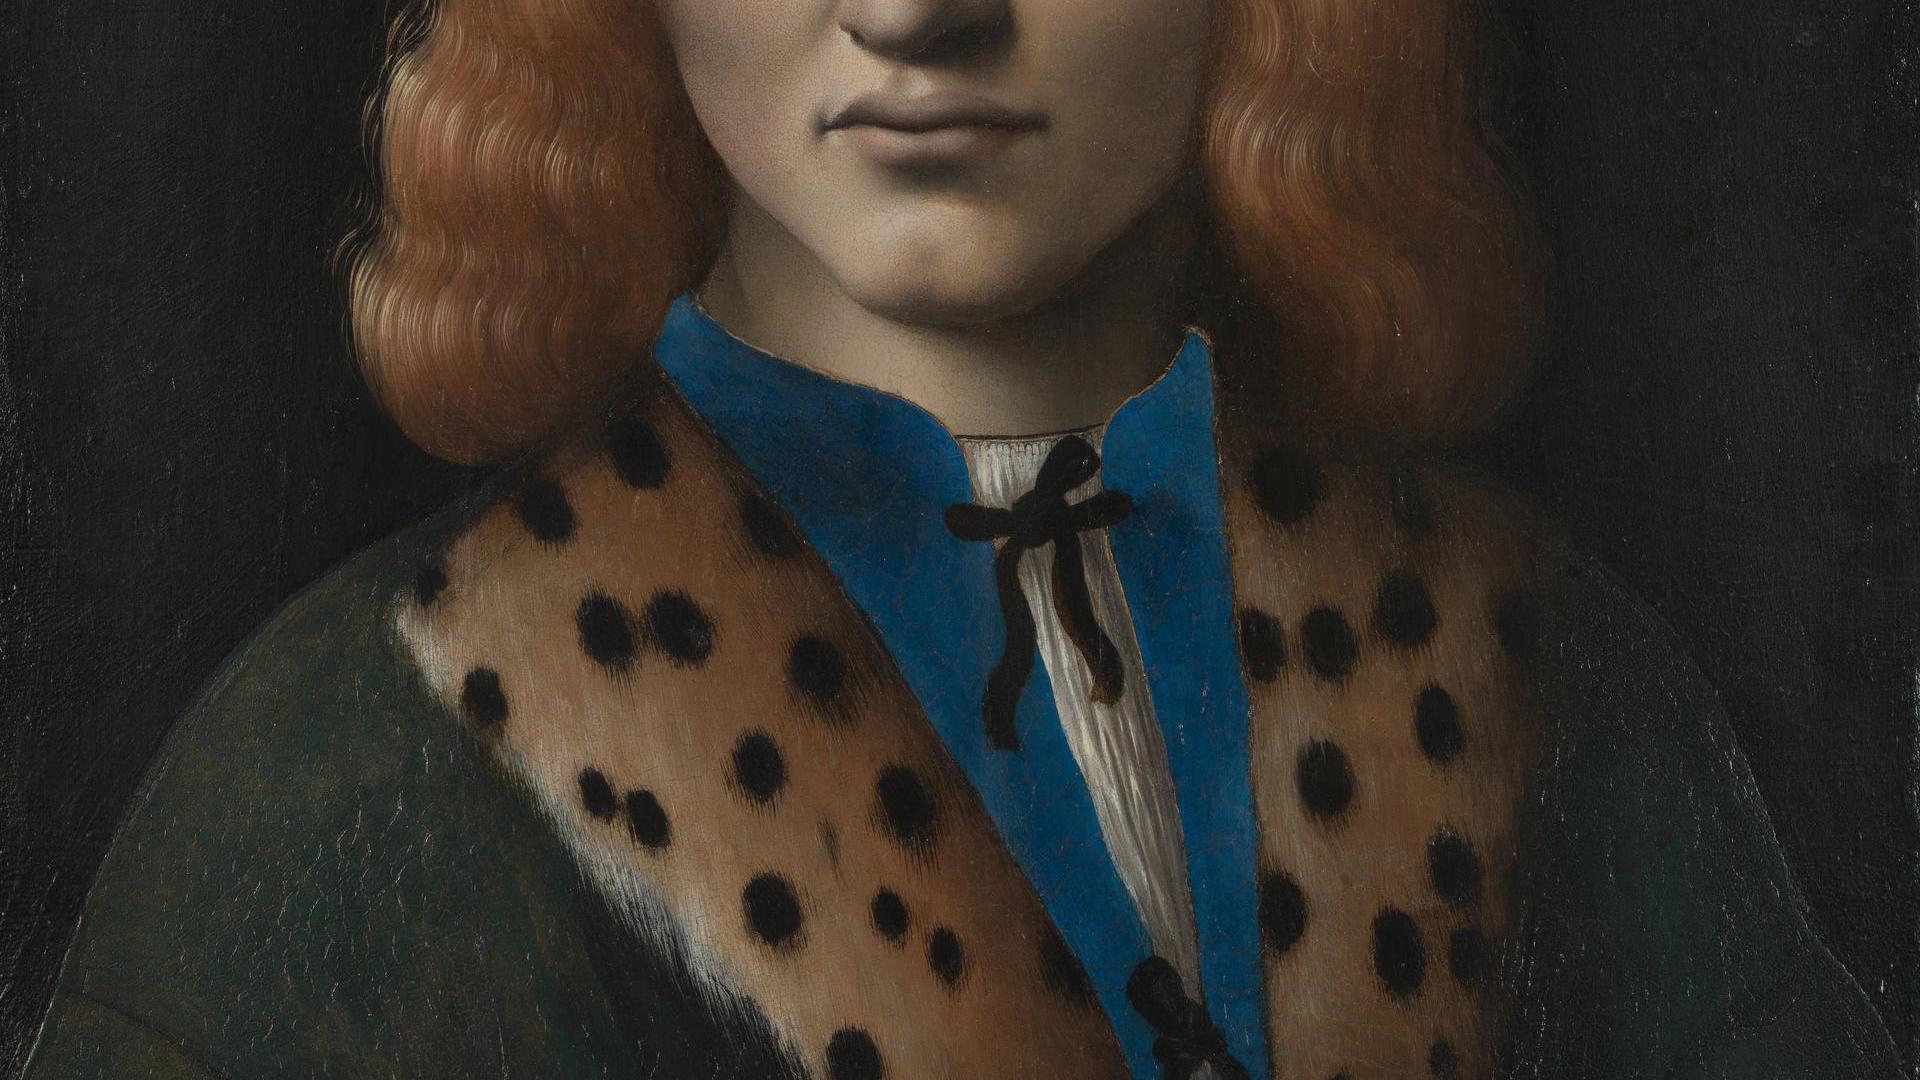 Portrait of a Man aged 20 ('The Archinto Portrait') by Marco d'Oggiono